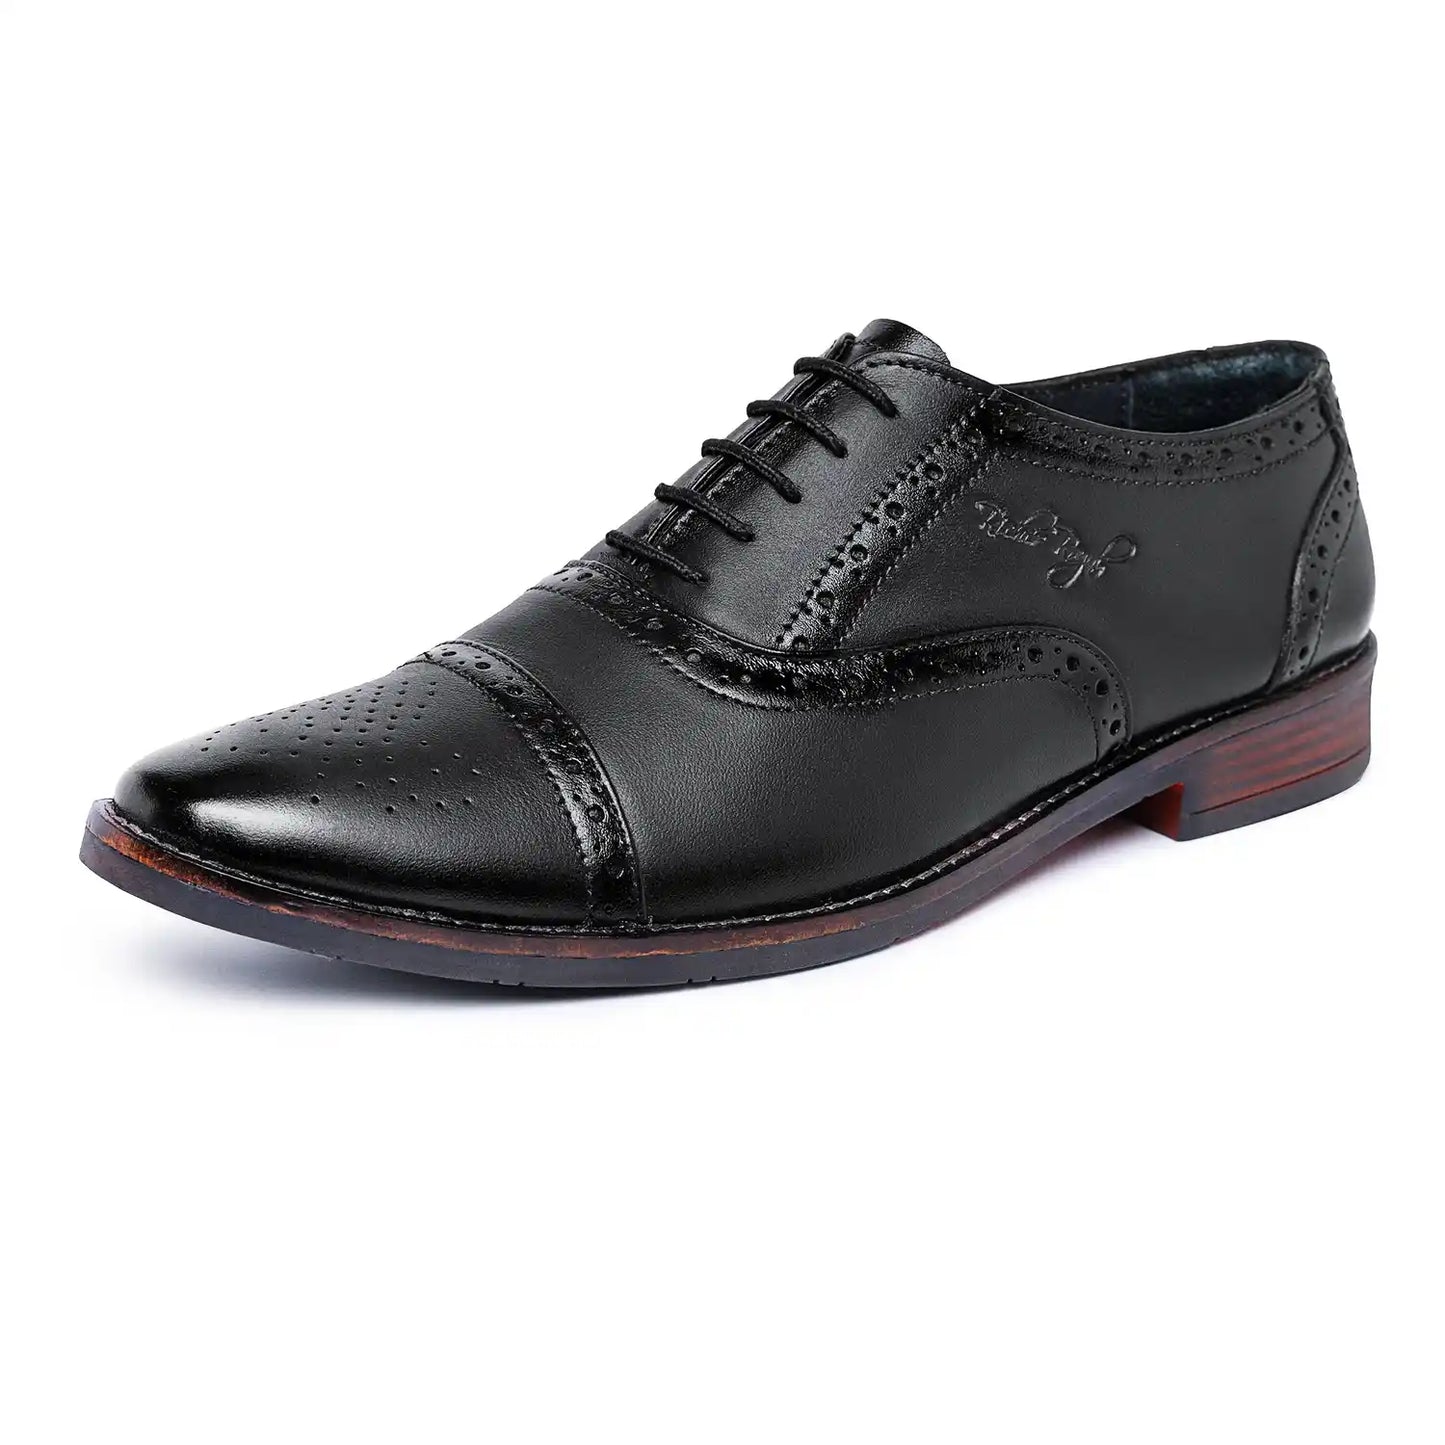 Genuine Leather Brogues for Men